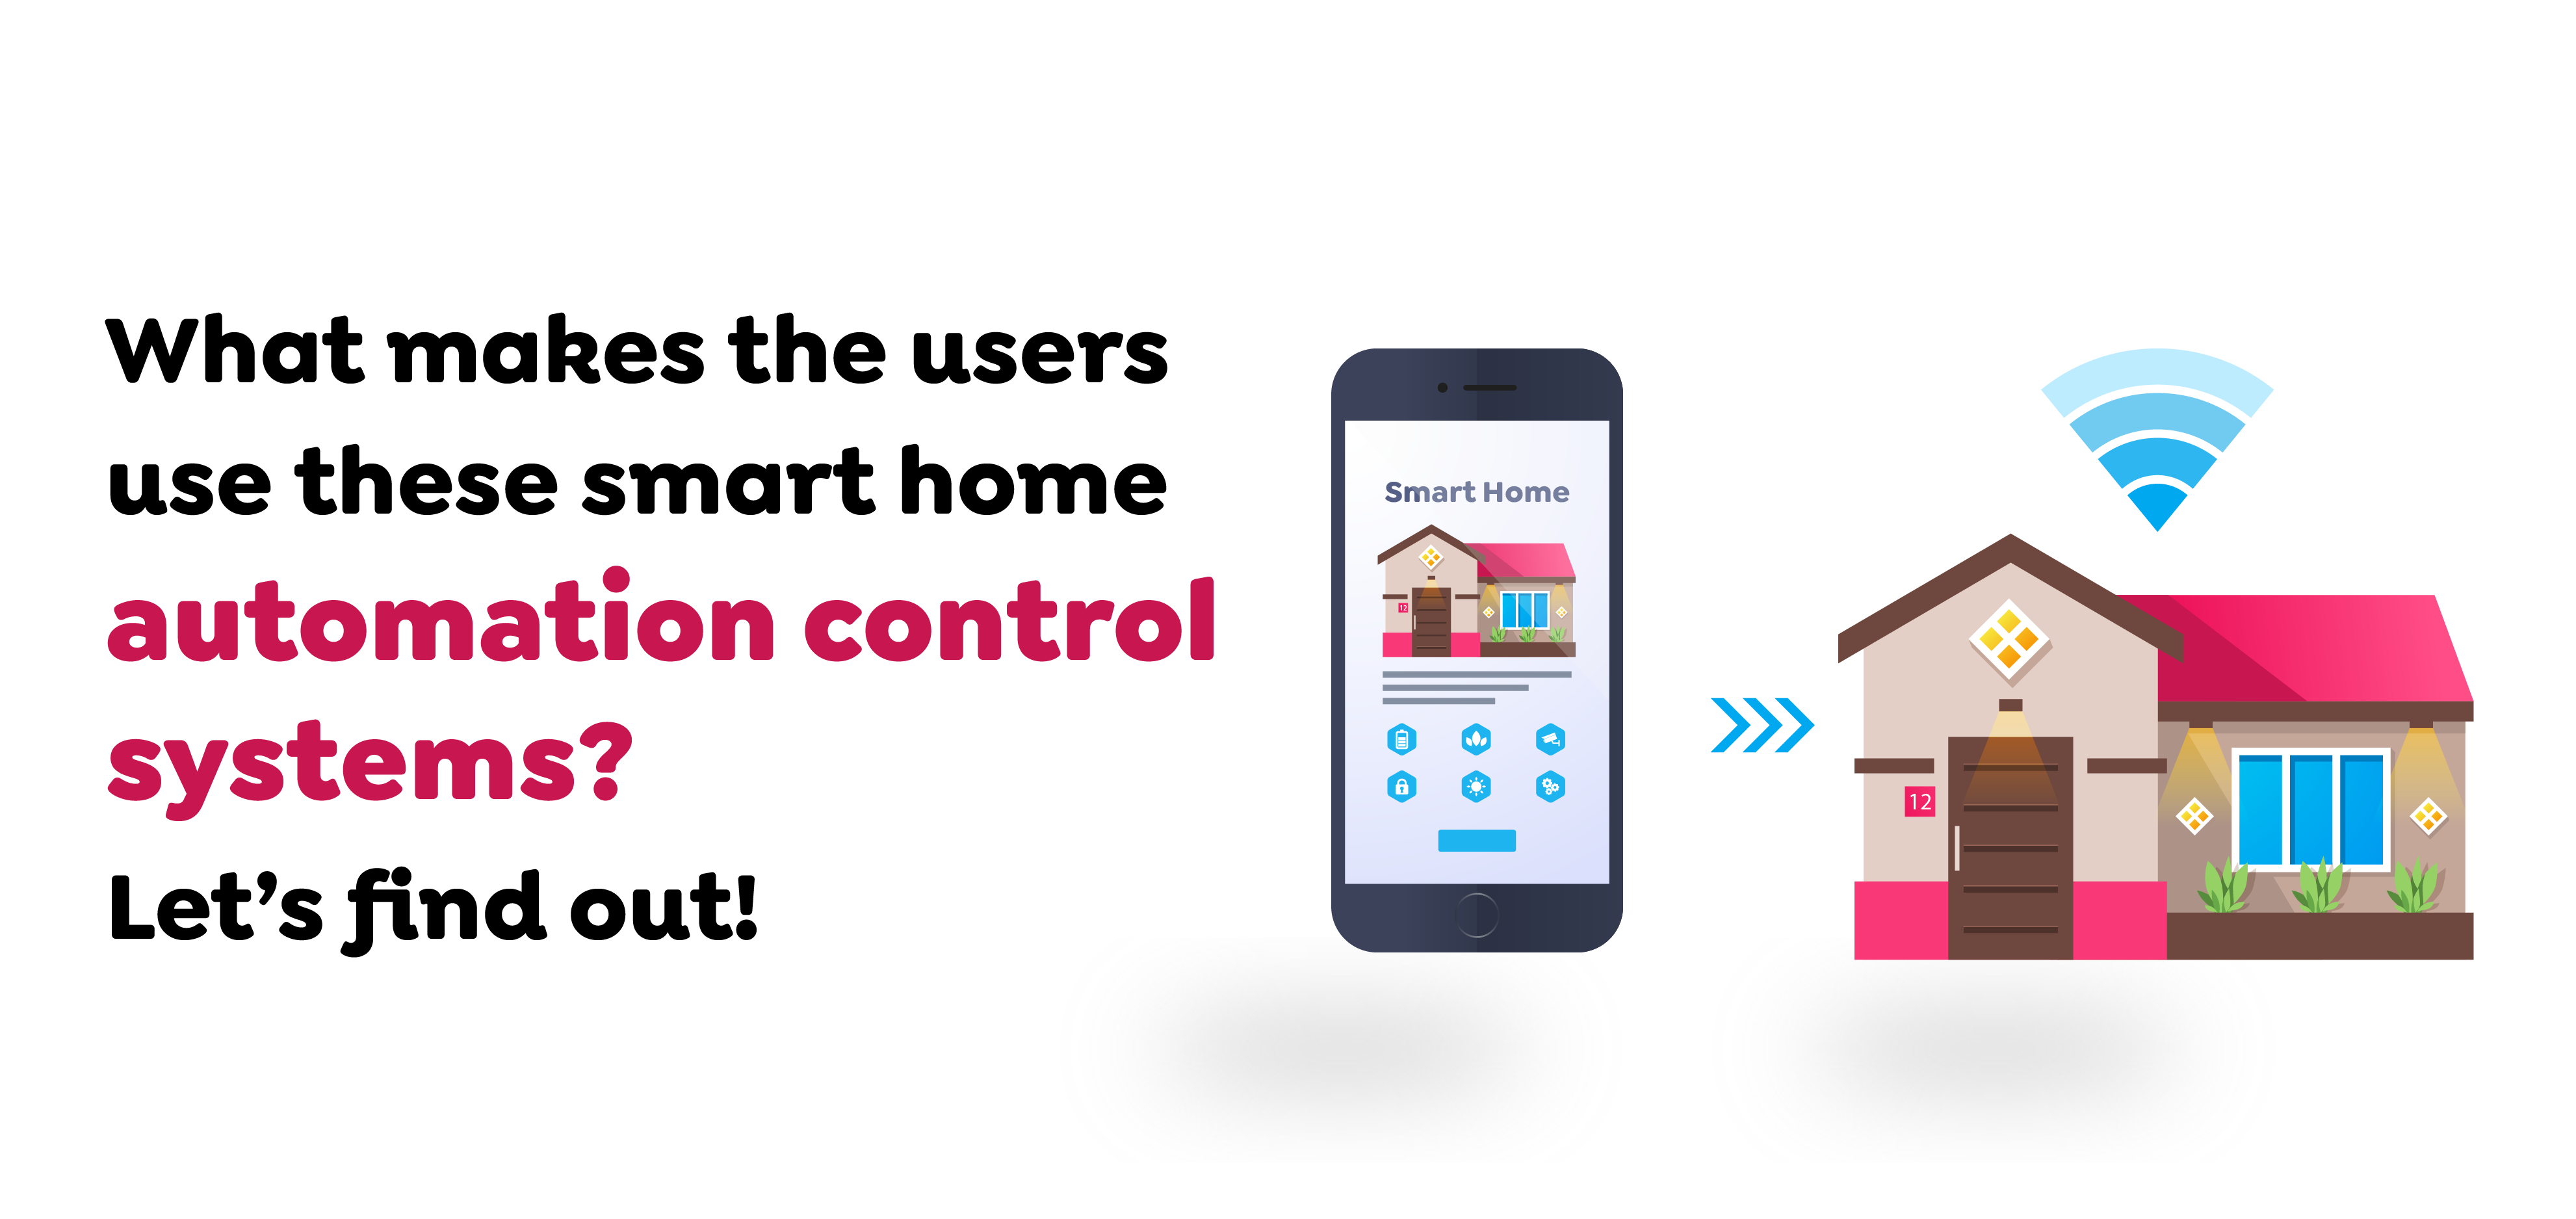 Smart Home Automation Control Systems